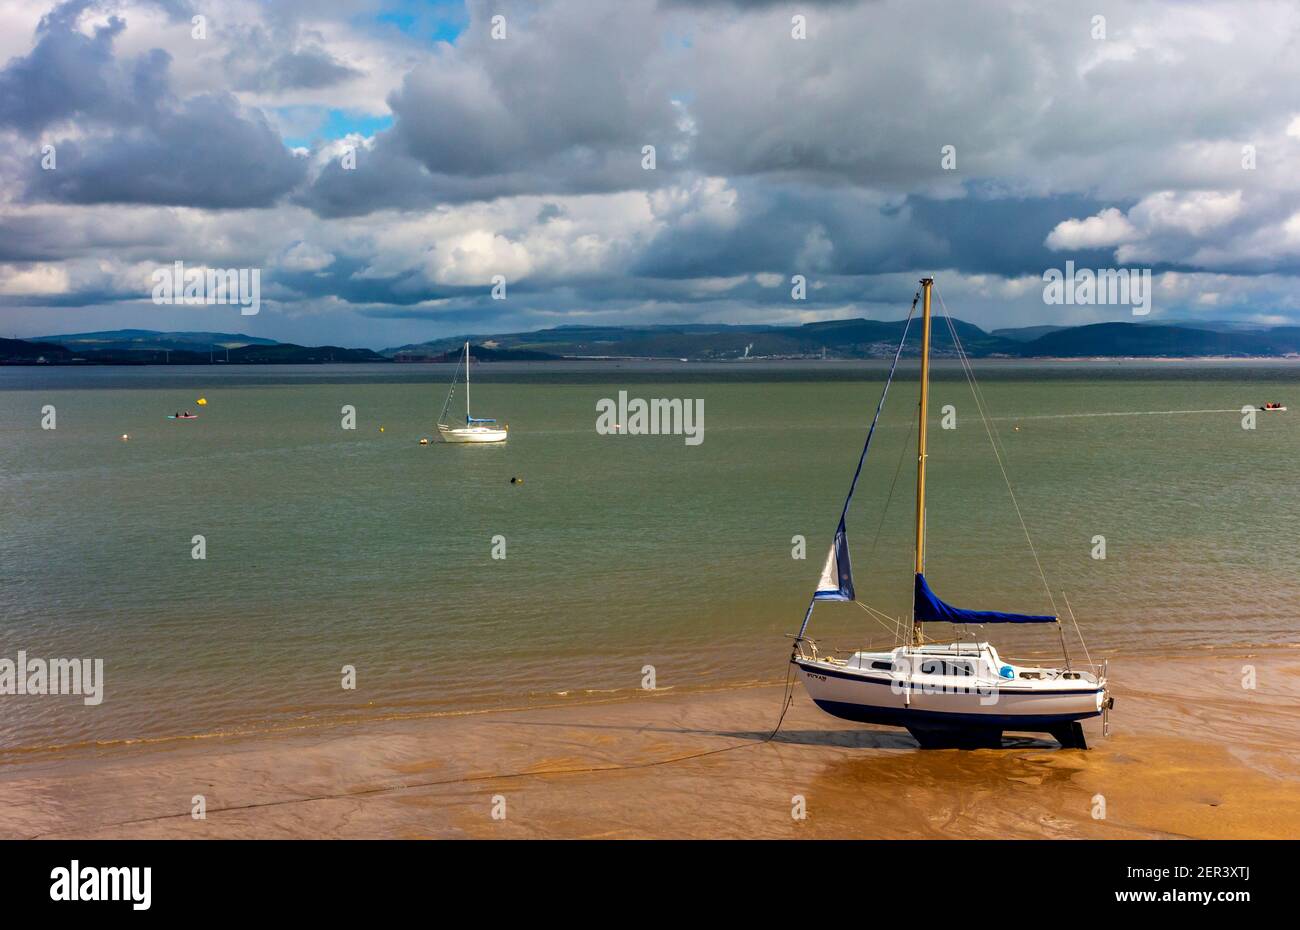 Boats in Swansea Bay seen from Mumbles Beach on the south east coast of the Gower Peninsula near Swansea in South Wales UK Stock Photo